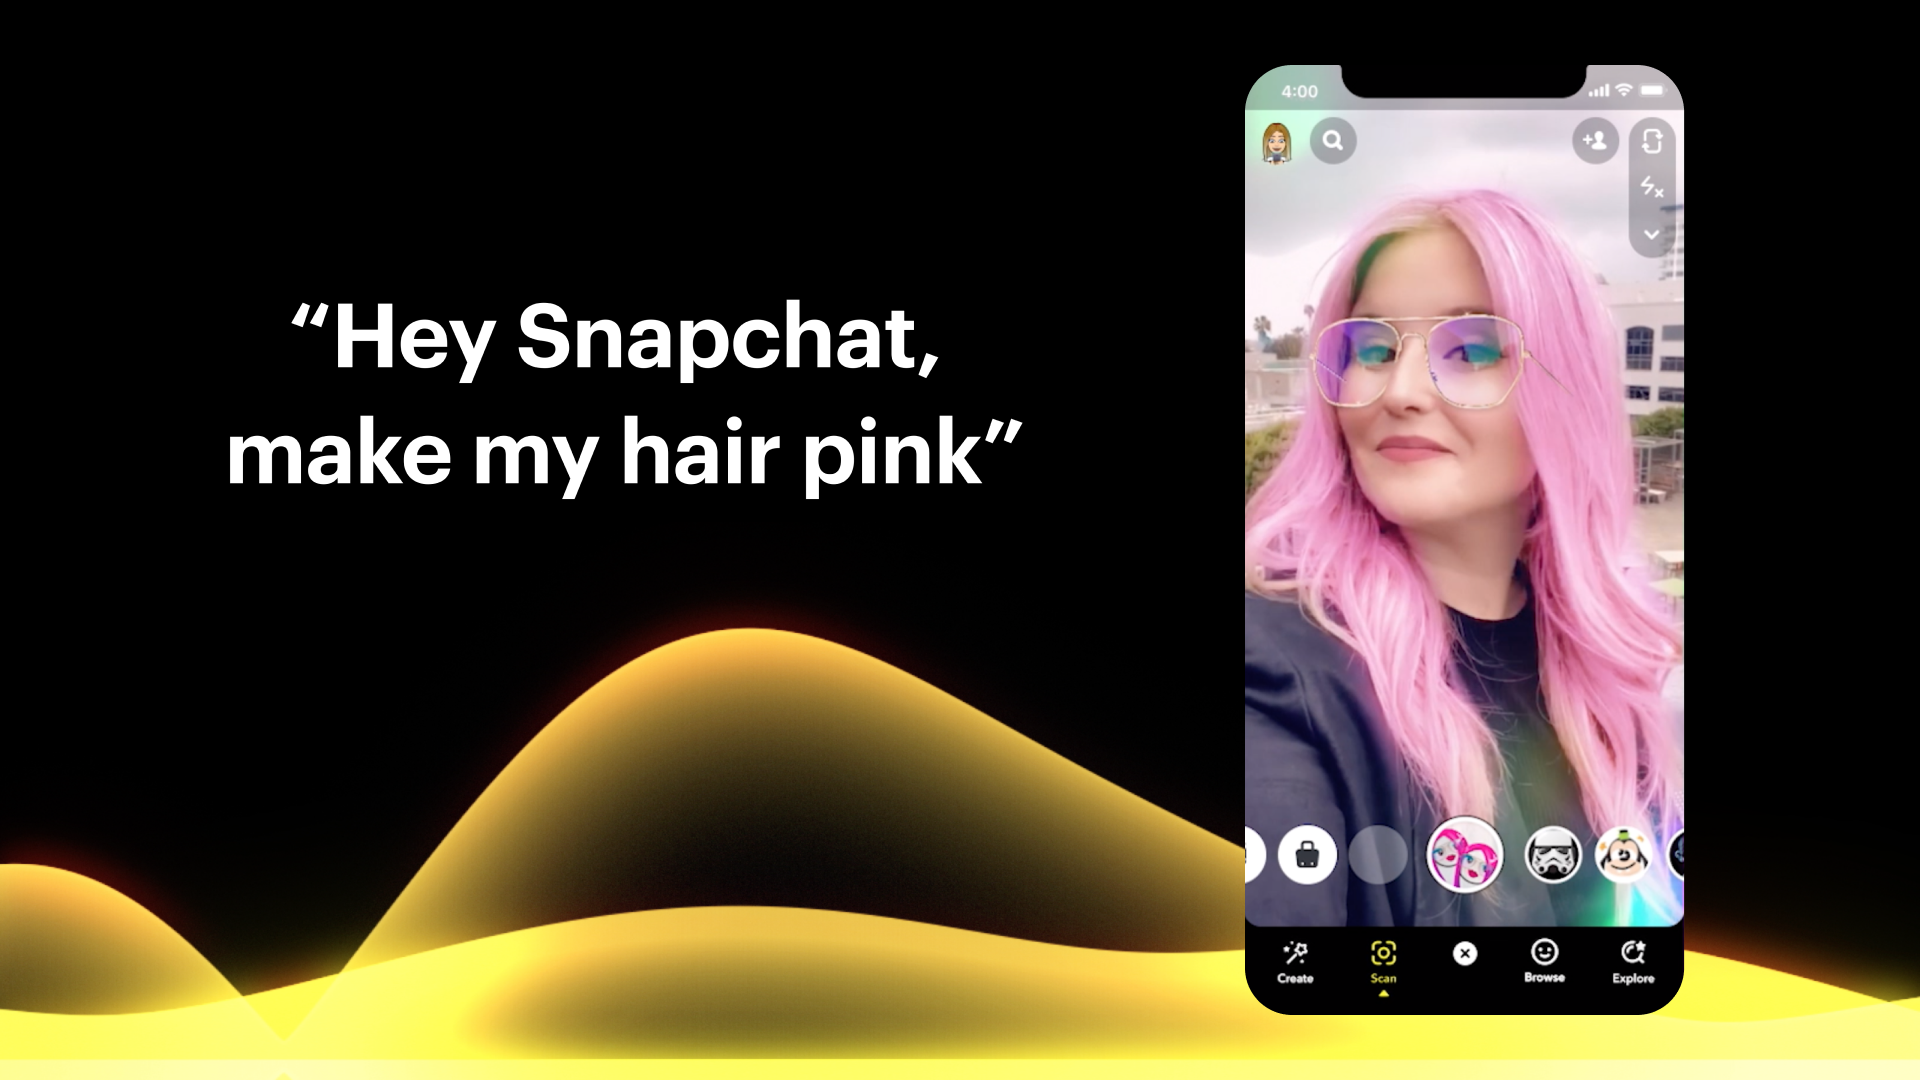 Snapchat's new Voice Scan feature, which allows users to apply filters using just their voice